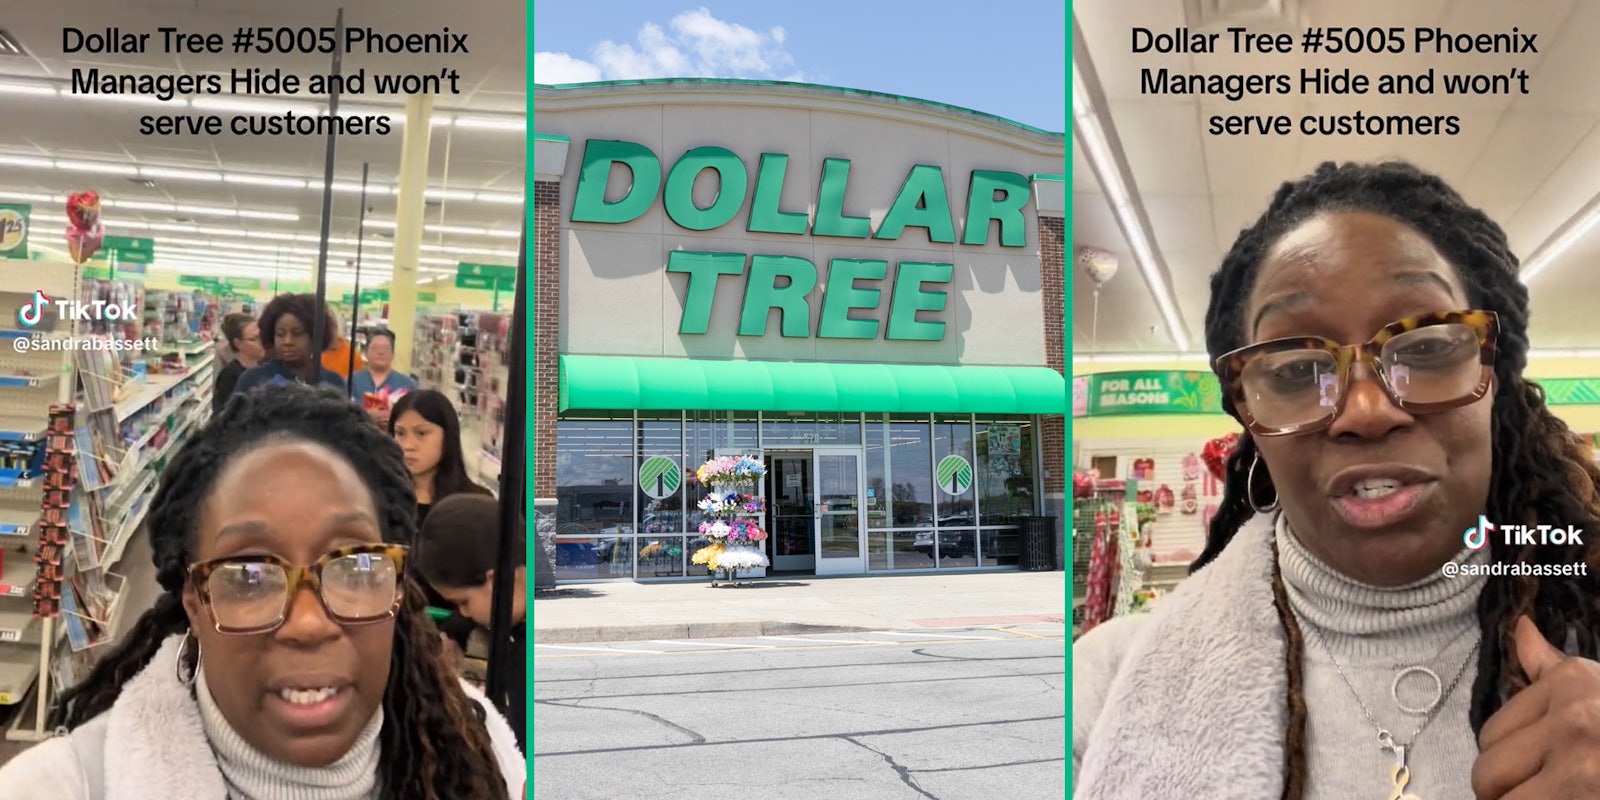 woman in line at Dollar Tree with caption 'Dollar Tree #5005 Phoenix Managers Hide and won't serve customers' (l&r) Dollar Tree sign (c)